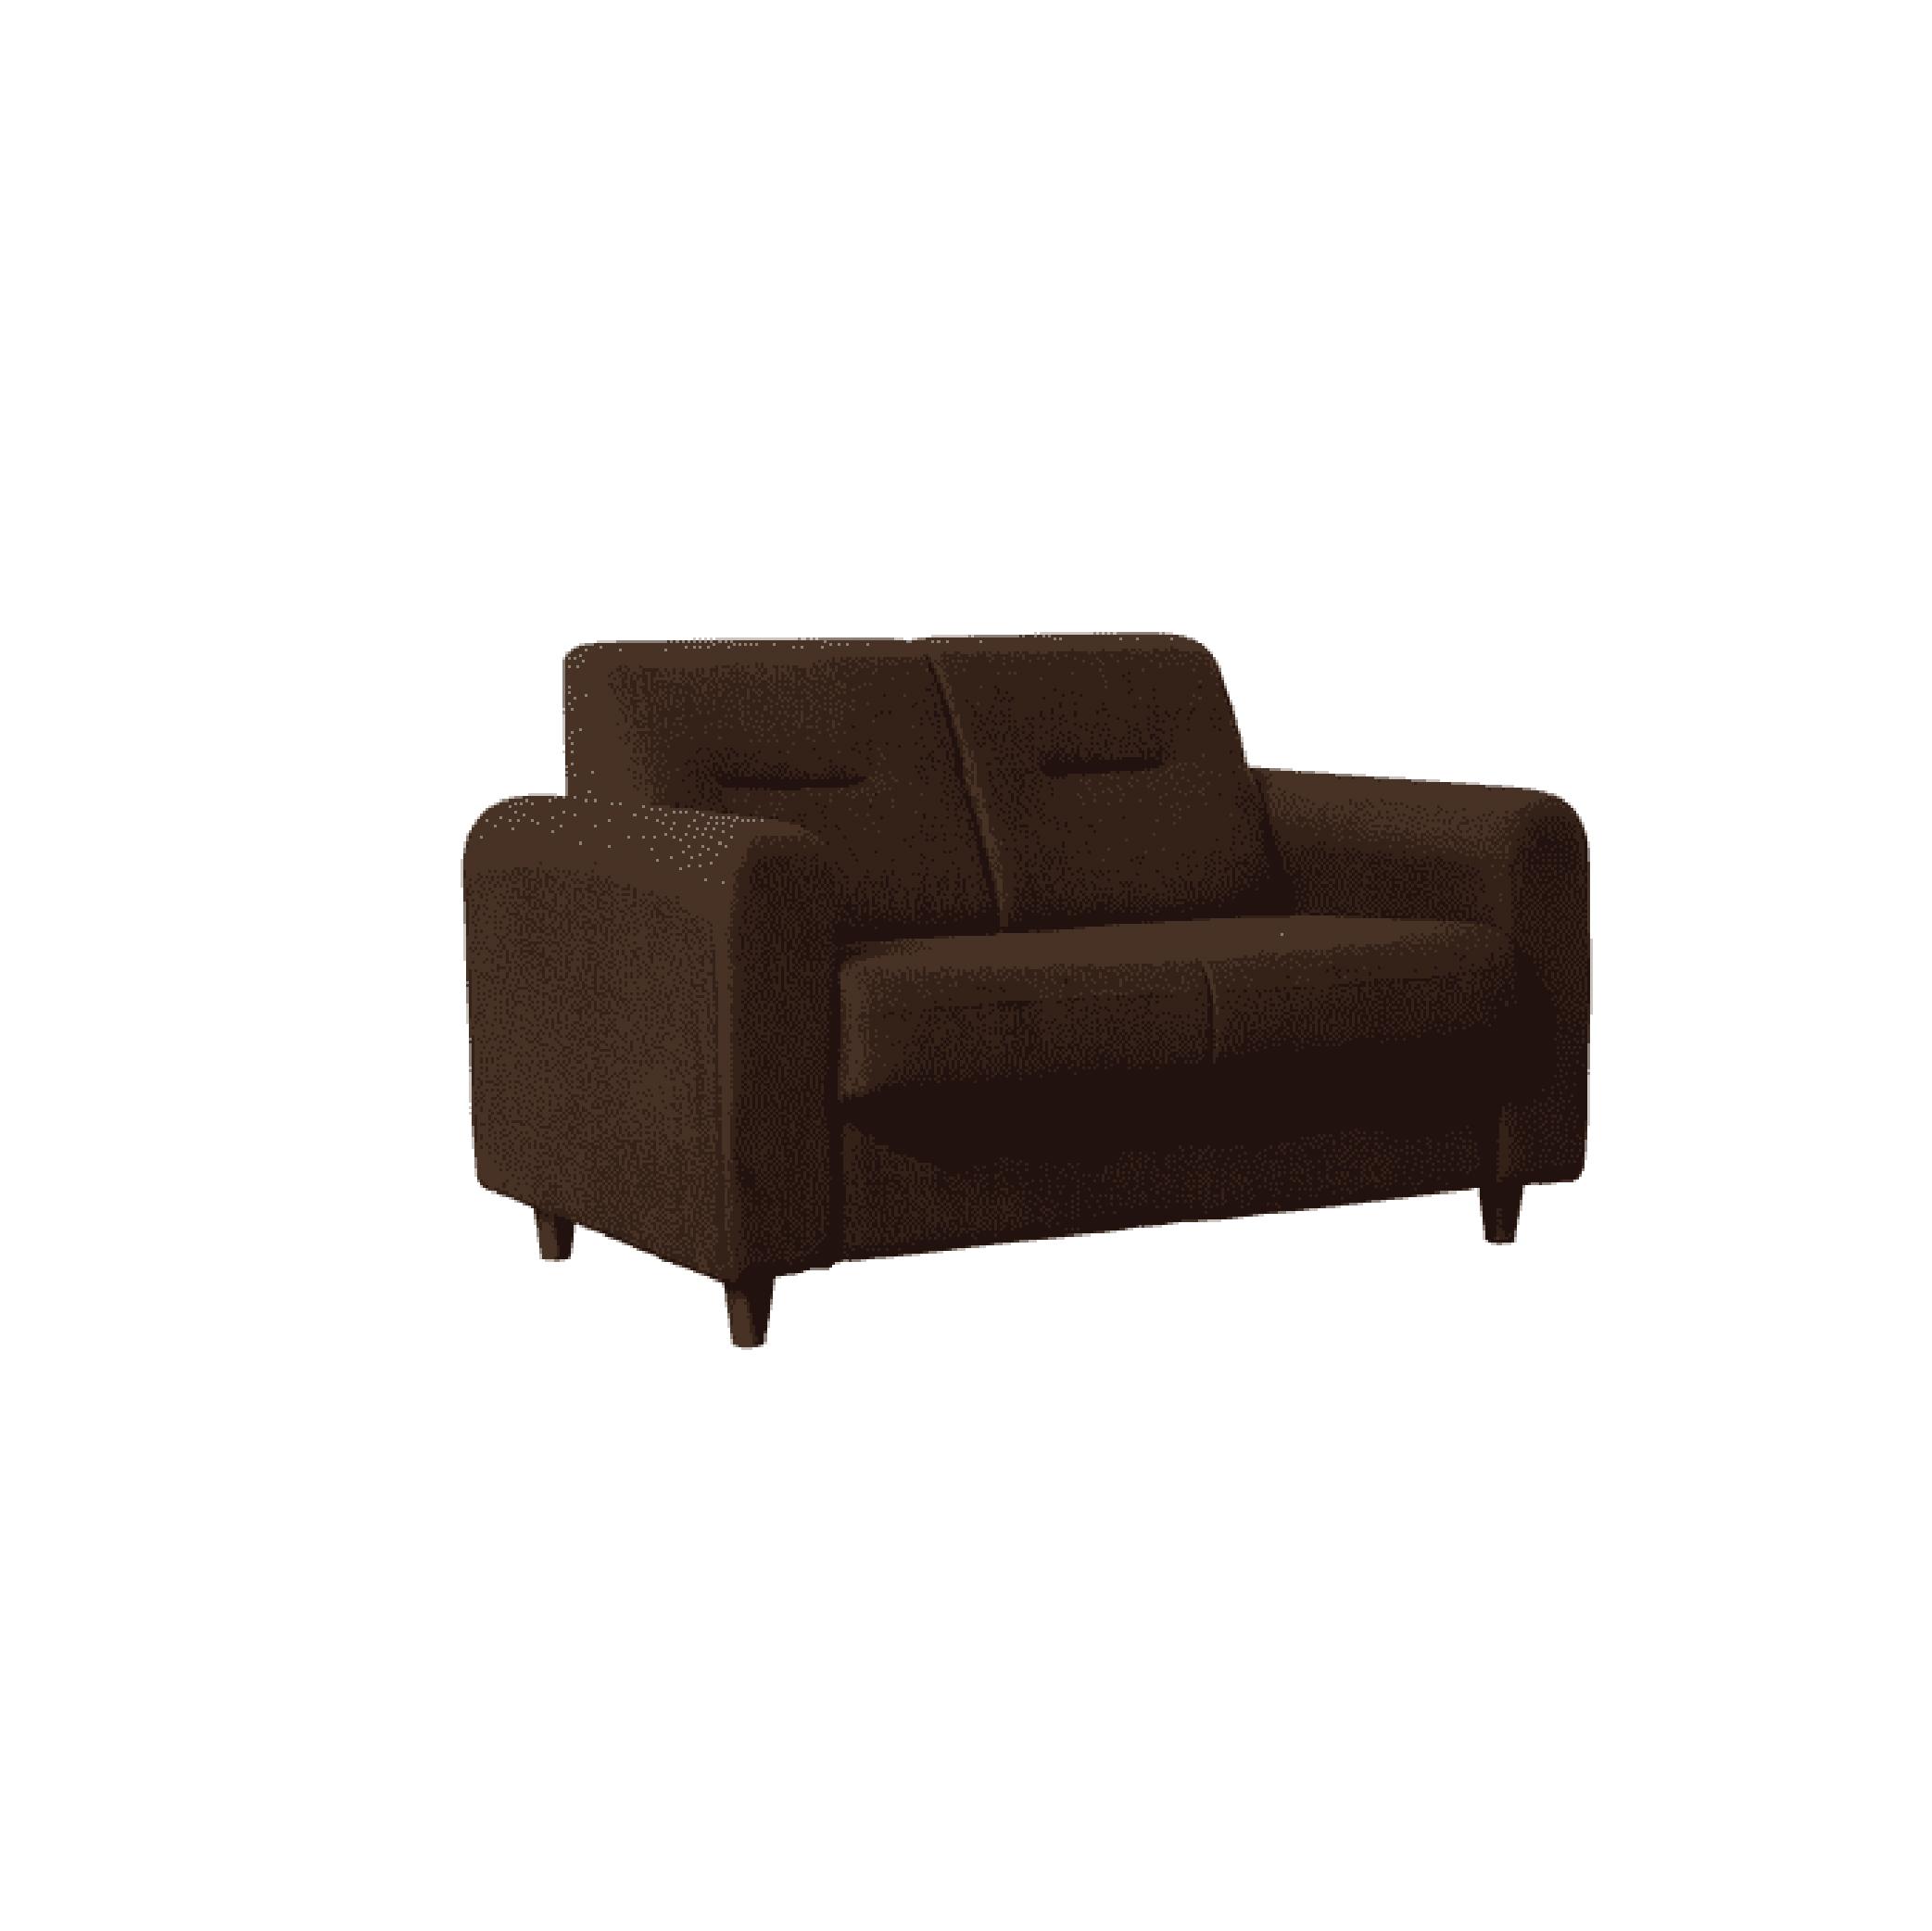 Nola Two Seater Sofa in Chestnut Brown Colour